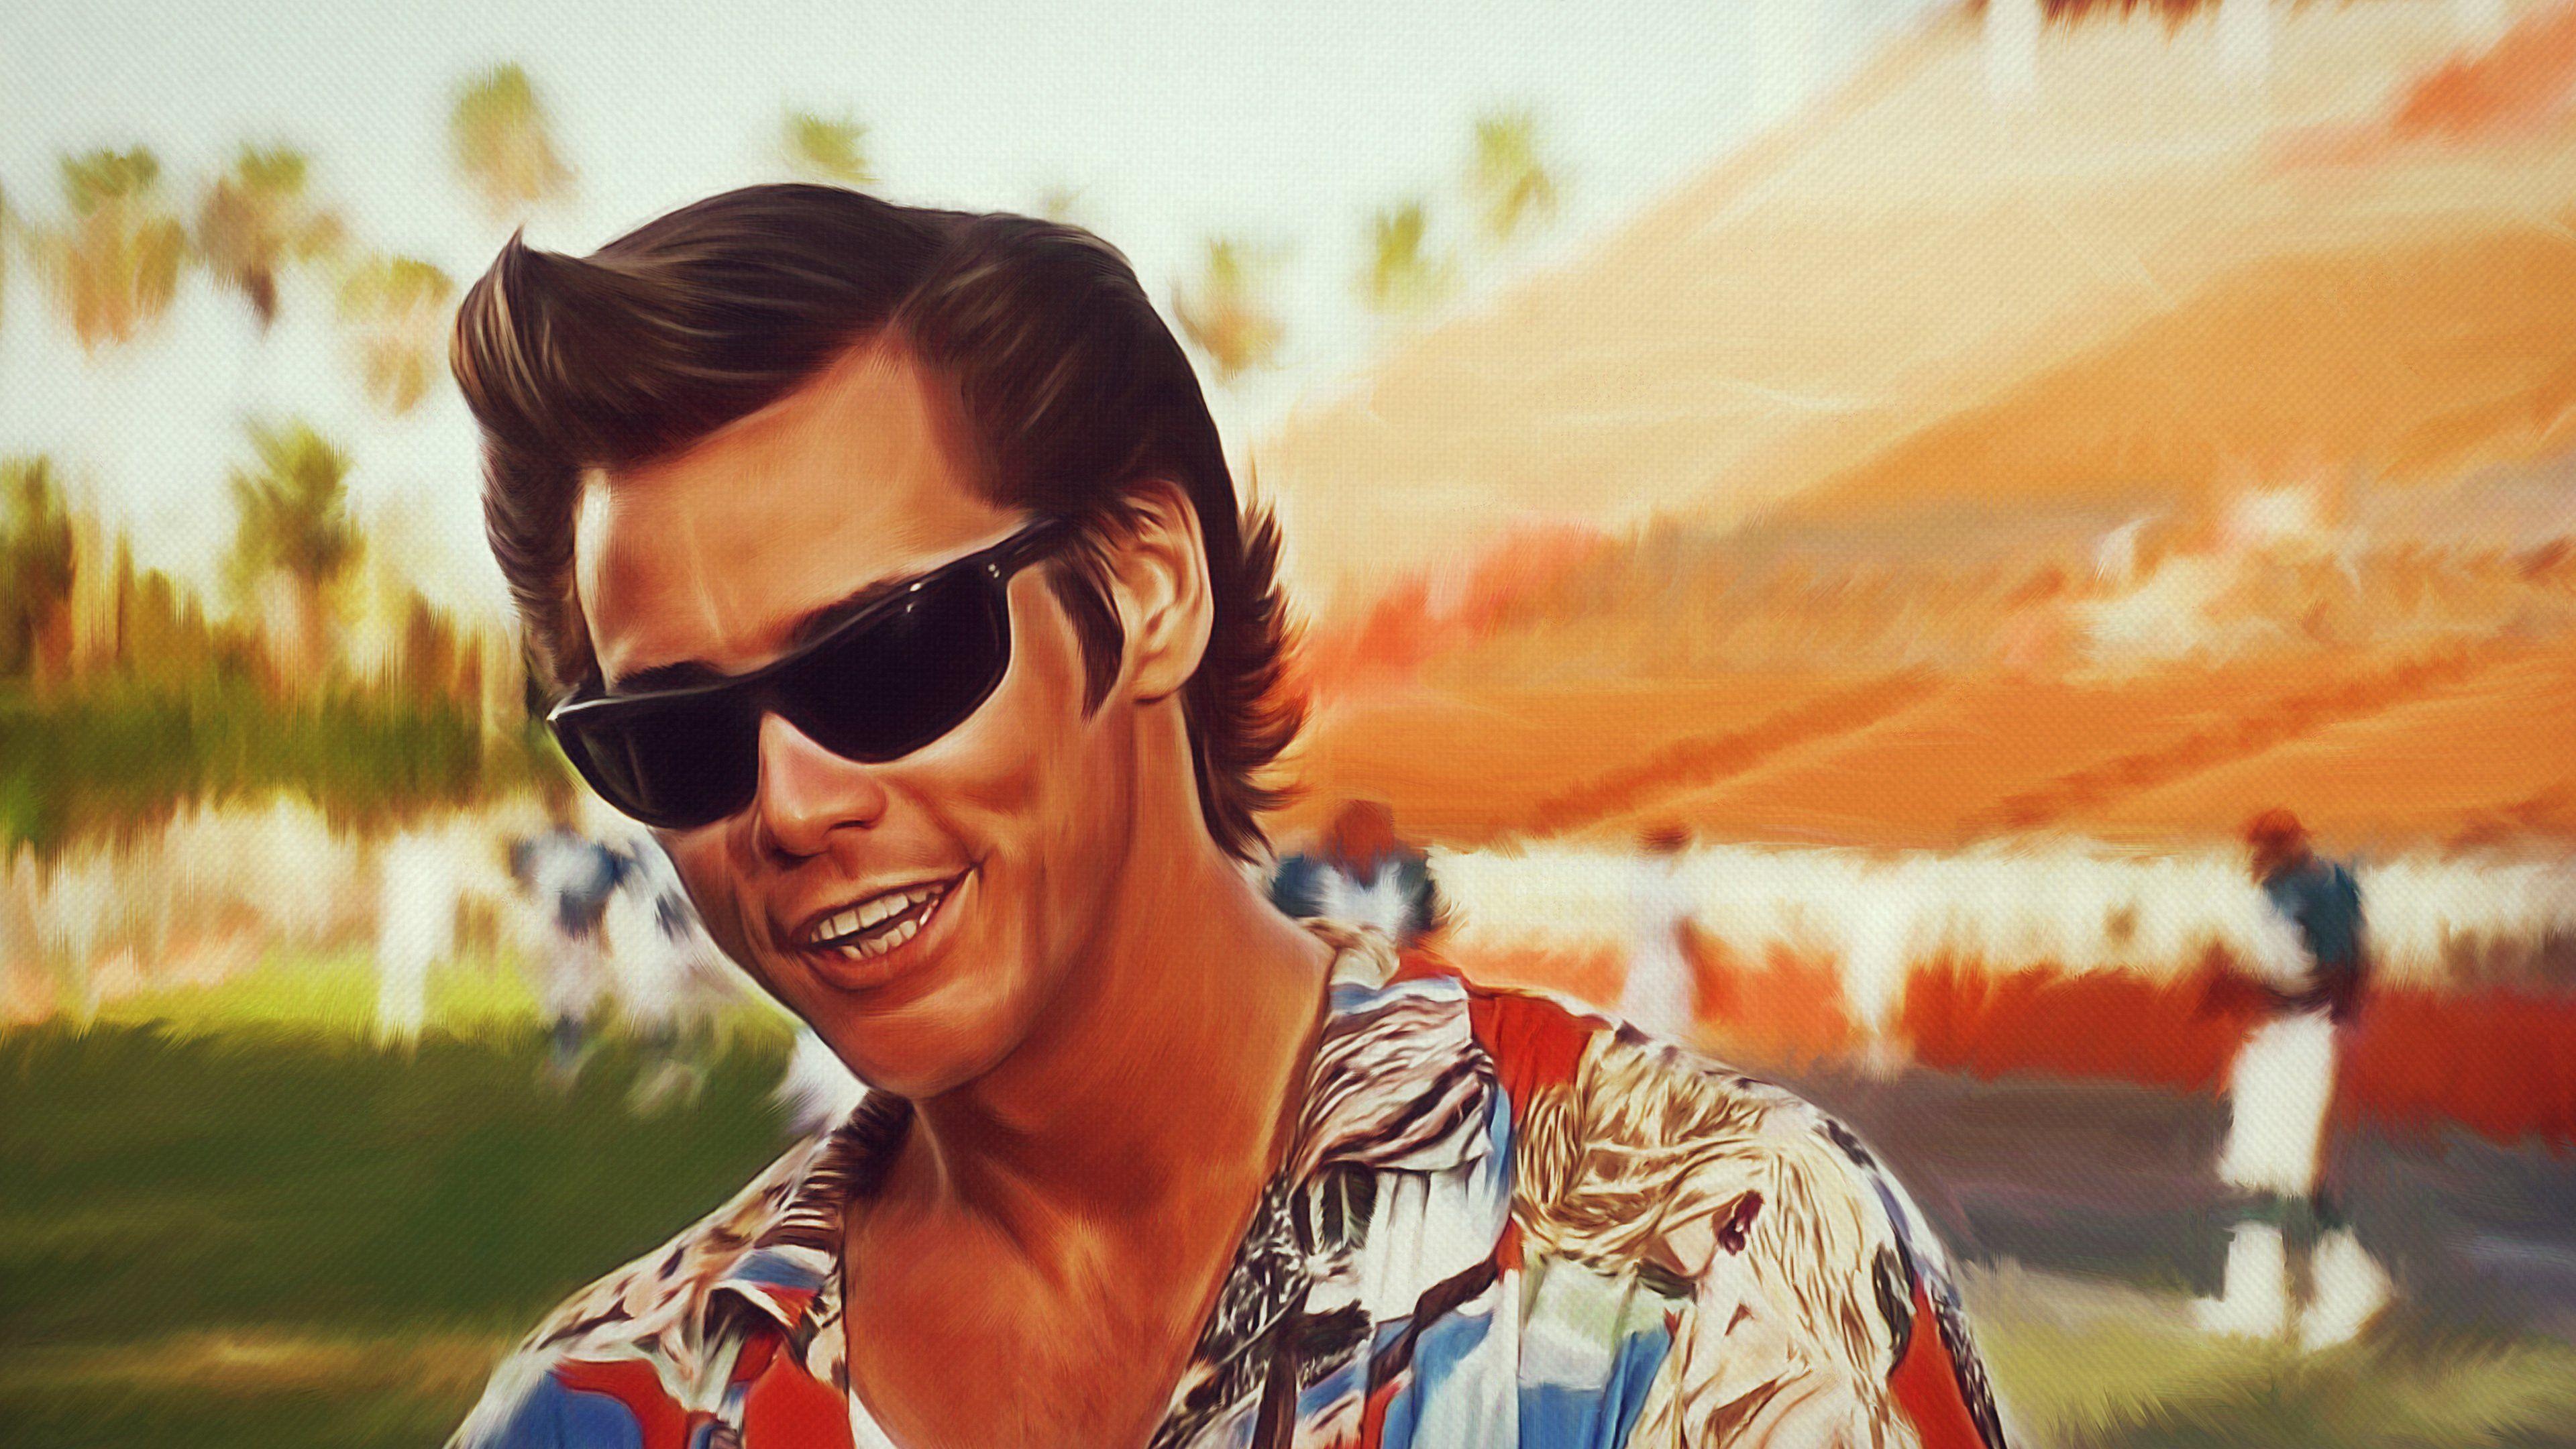 Ace Ventura: An unorthodox Miami-based private detective who specializes in retrieving tame or captive animals. 3840x2160 4K Wallpaper.